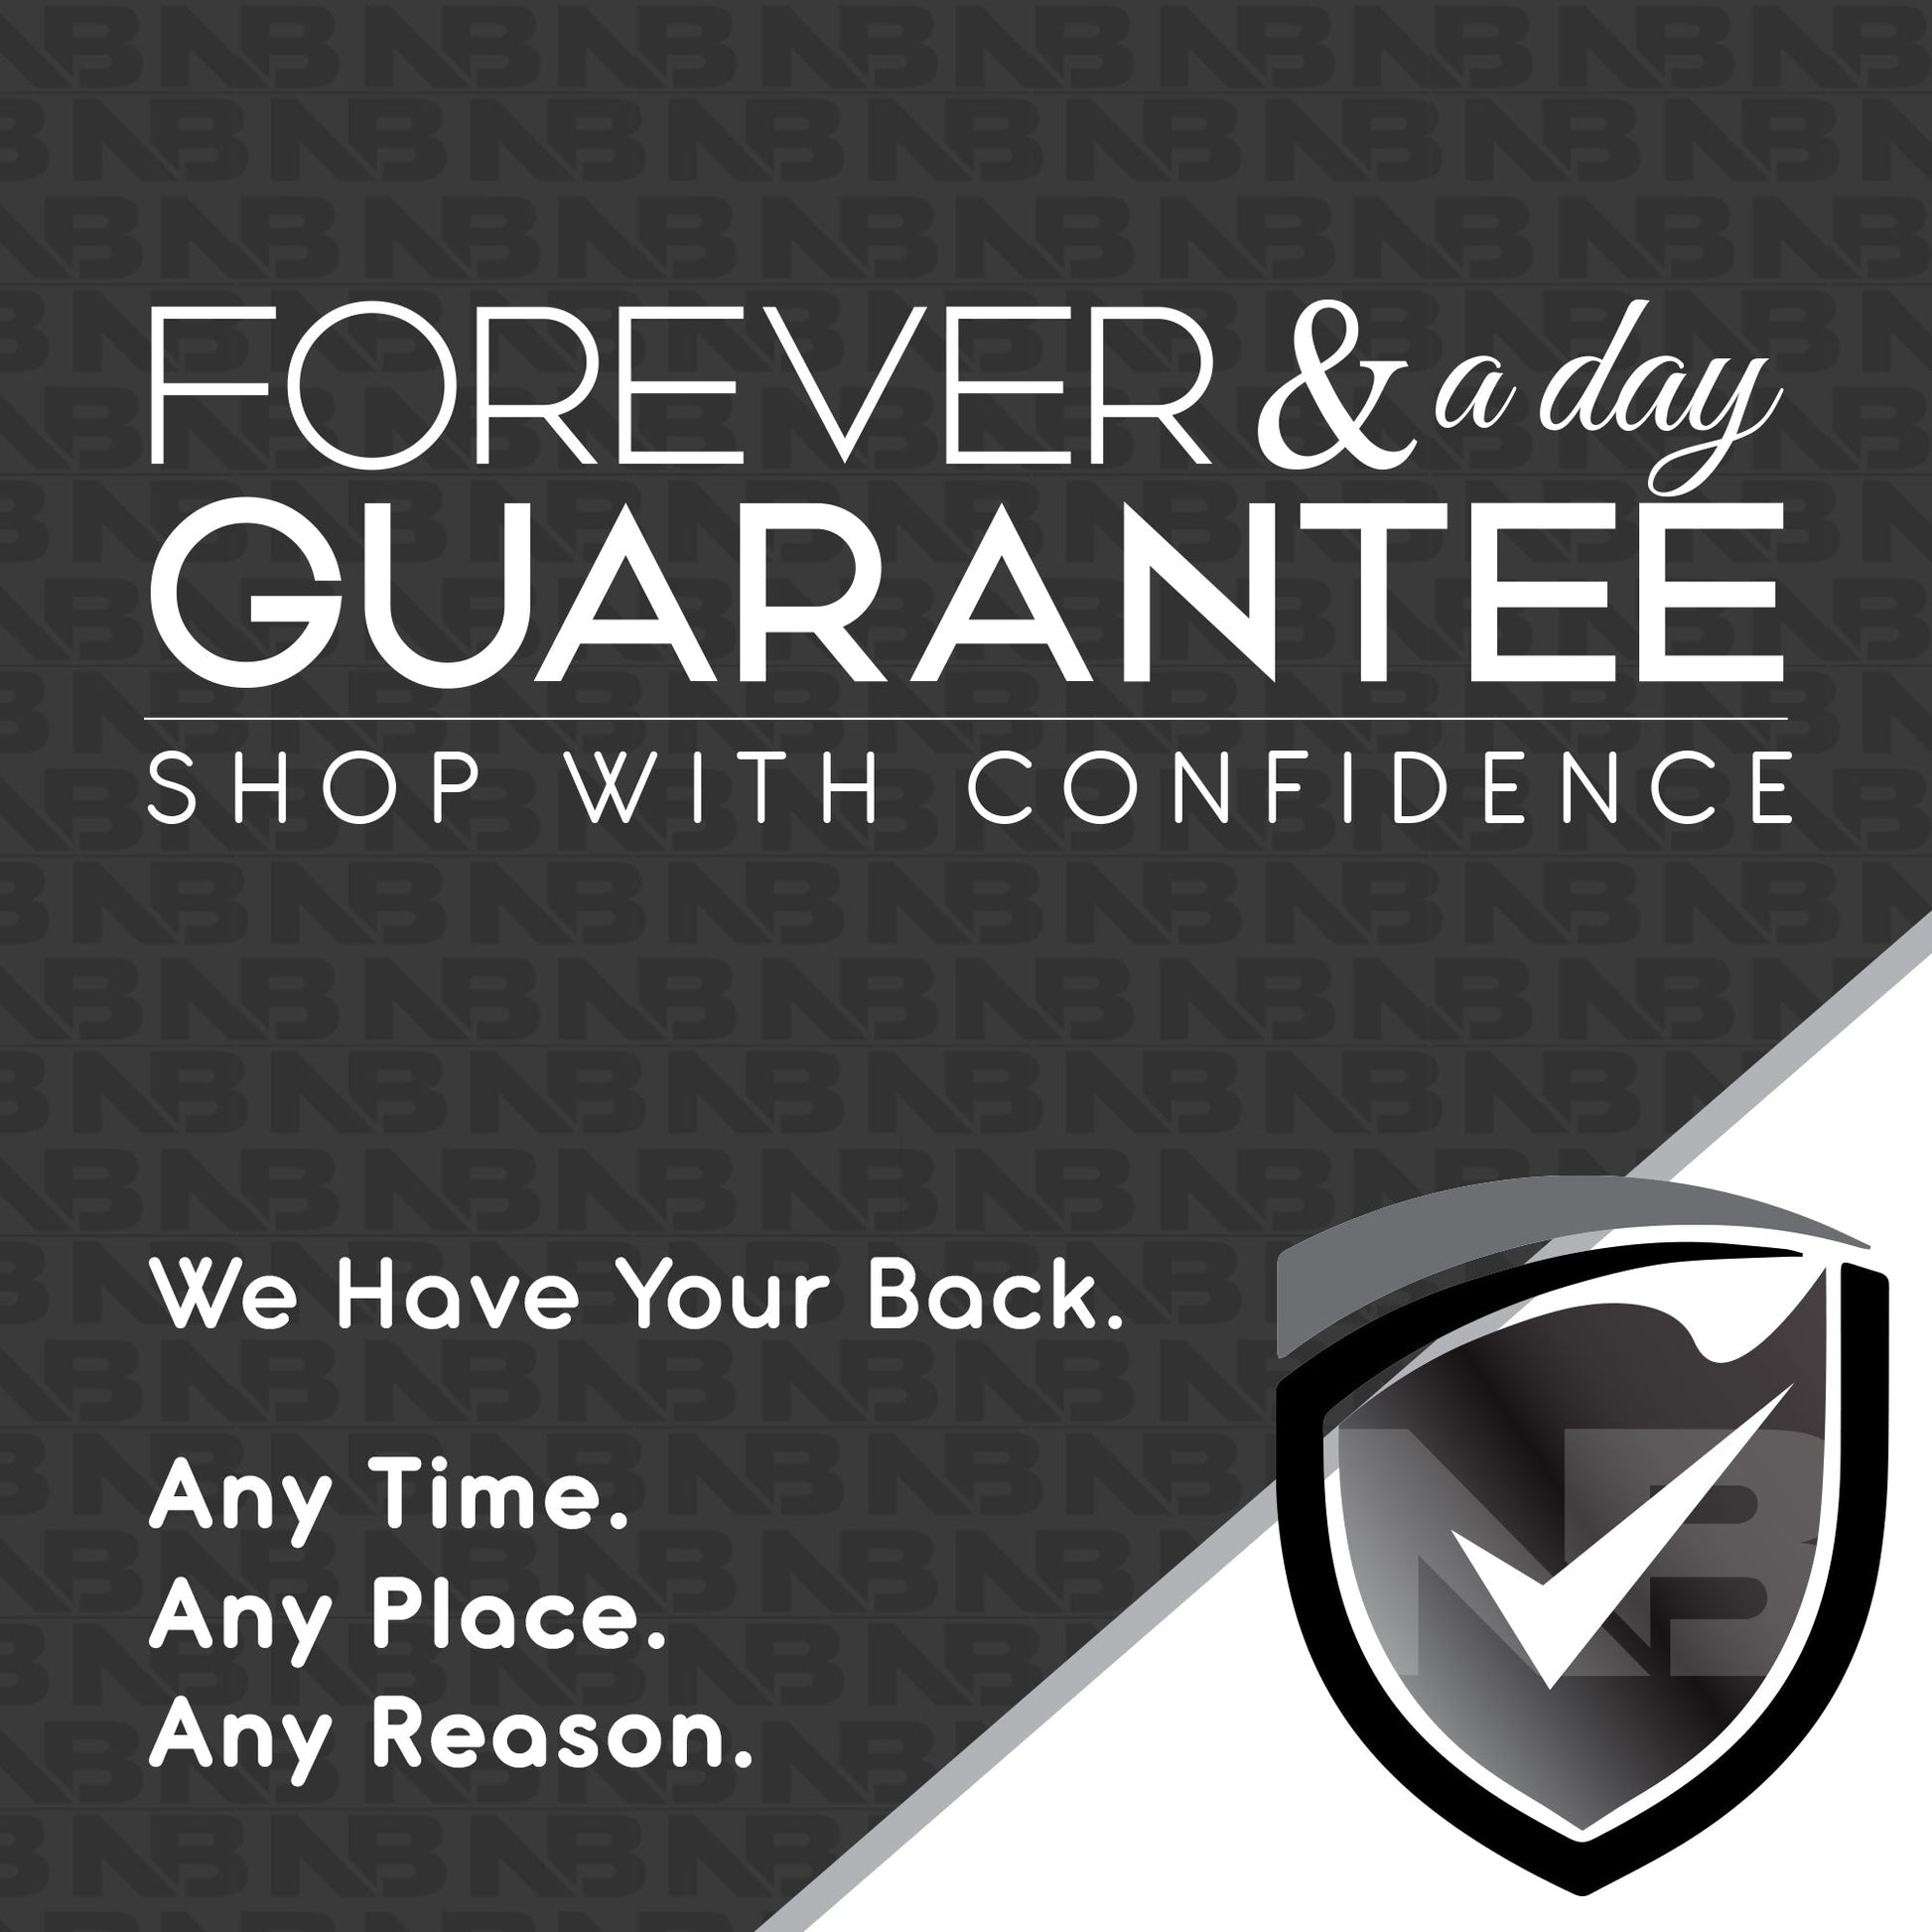 NutraBio Forever and a day guarantee. NutraBio has your back. Any time. Any Place. Any Reason. 